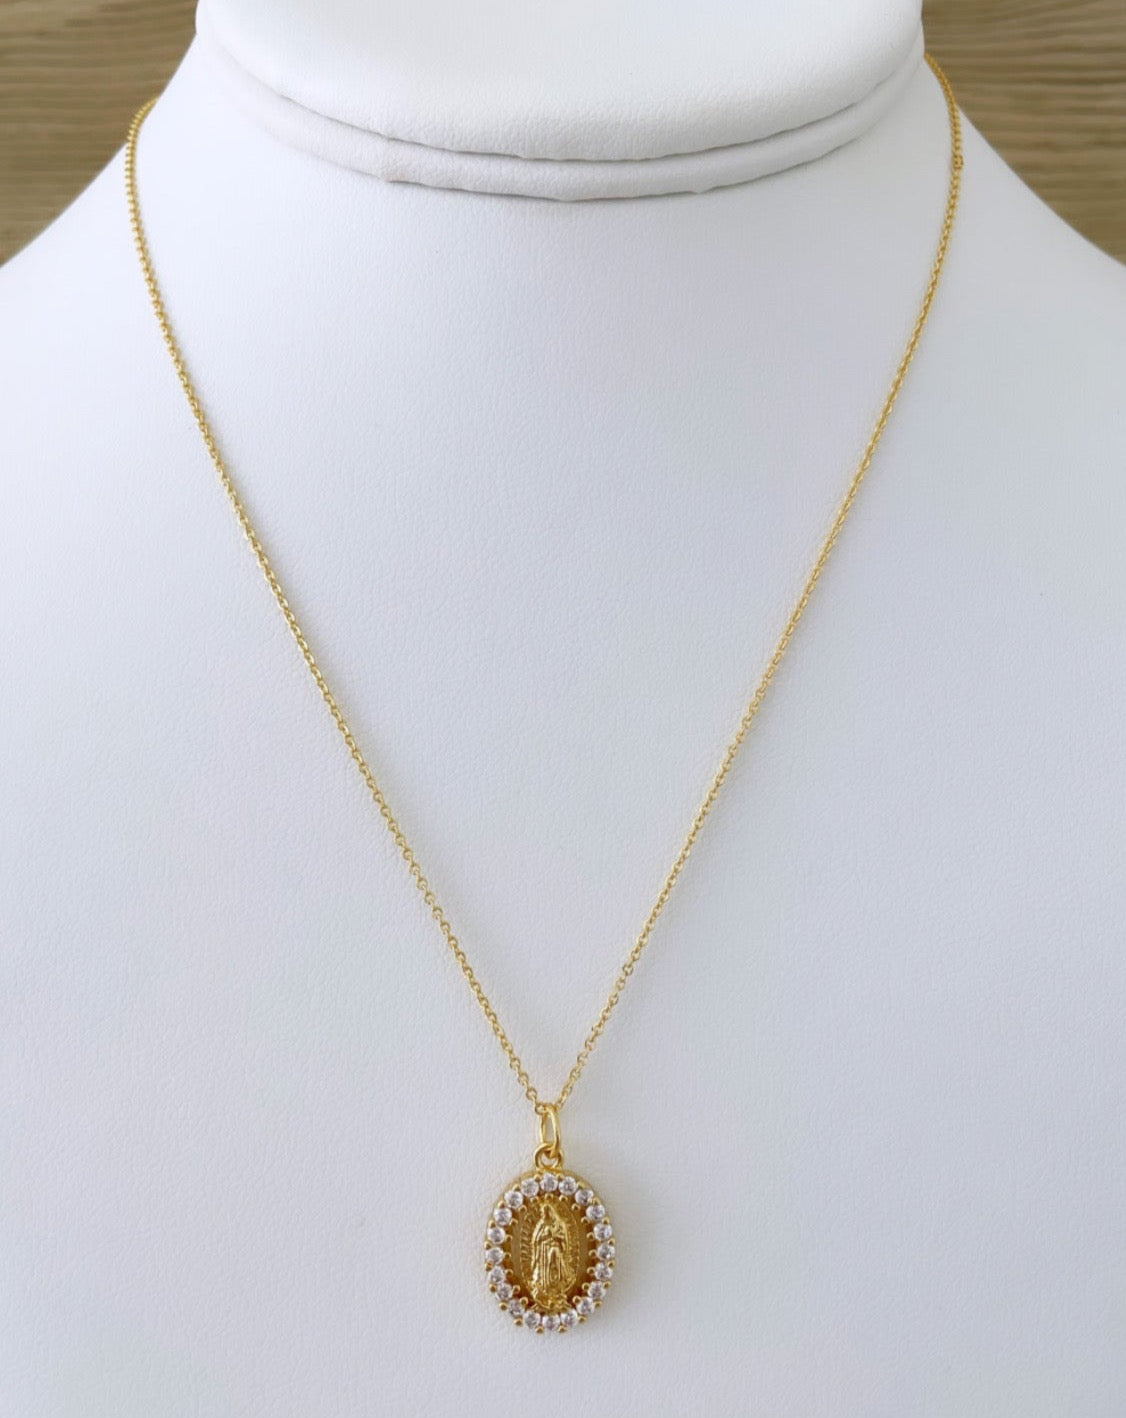 Guadalupe Vigin Necklace - LimaLimón Store